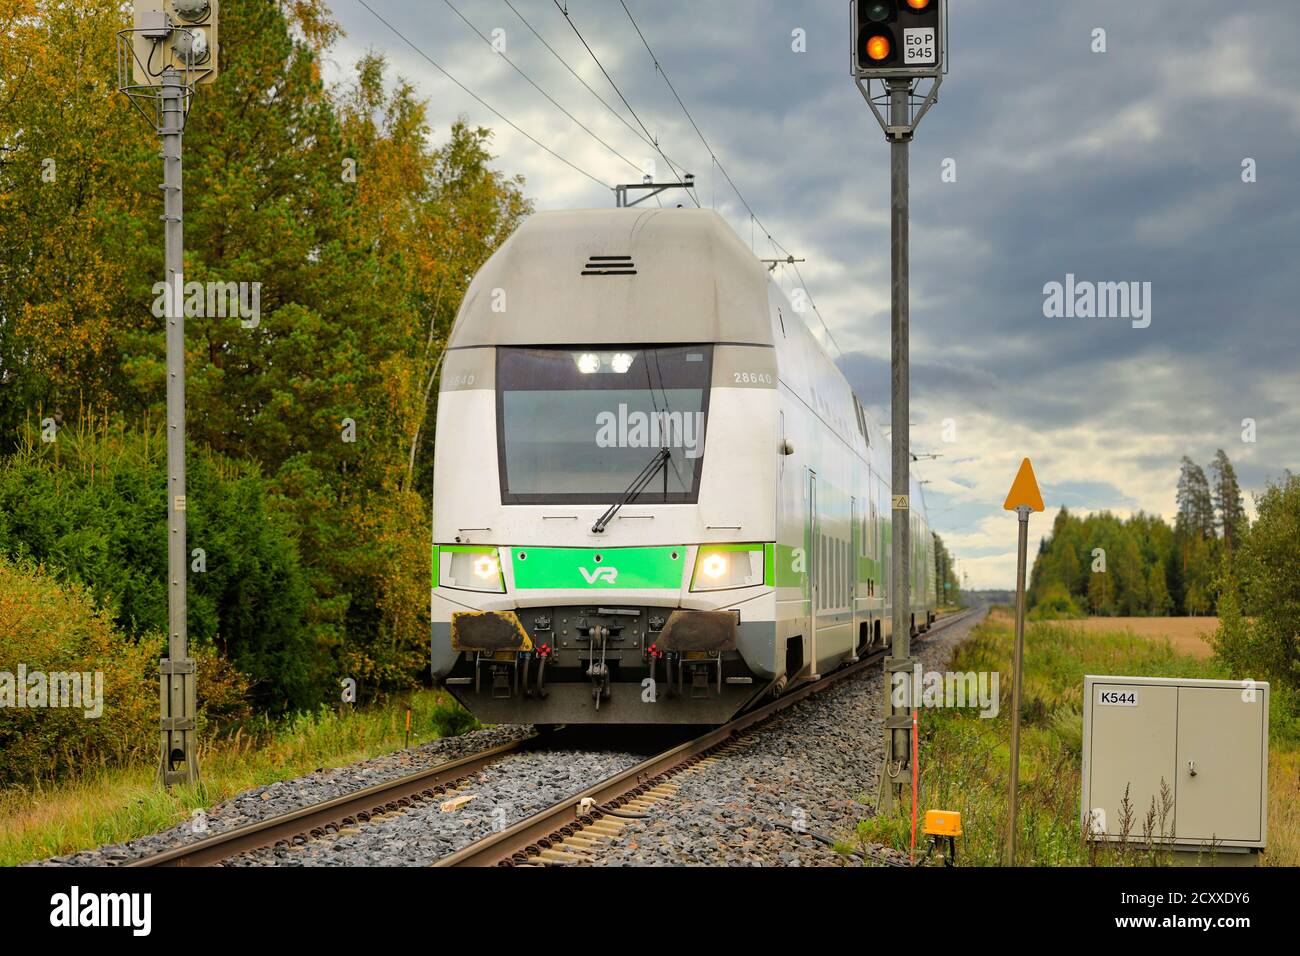 Modern VR Group Intercity electric 2 storey passenger train on the move at rural railroad crossing. Loimaa, Finland. September 18, 2020. Stock Photo